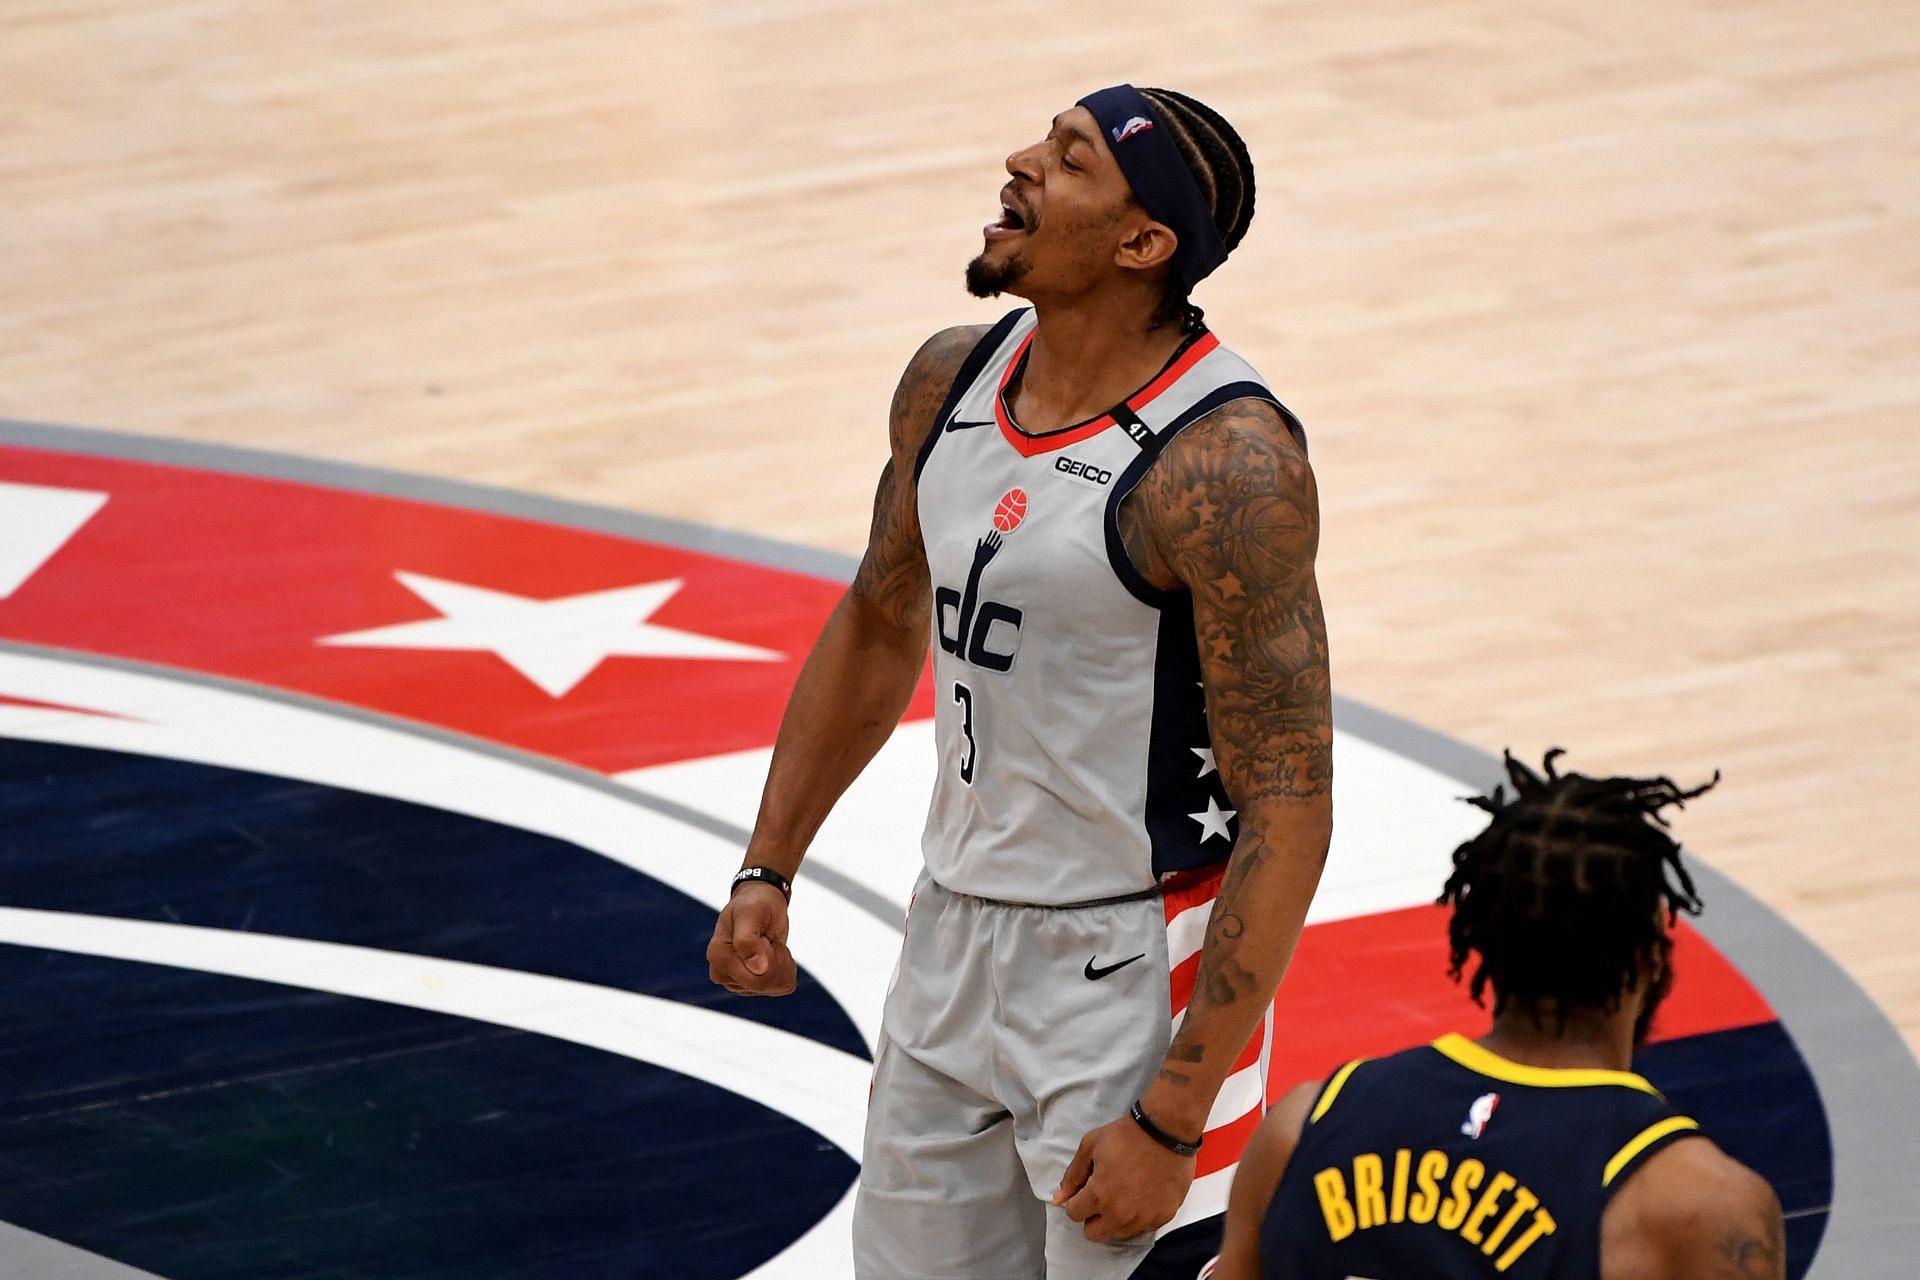 Bradley Beal #3 of the Washington Wizards celebrates after a play against the Indiana Pacers during the second half at Capital One Arena on May 20, 2021 in Washington, DC.